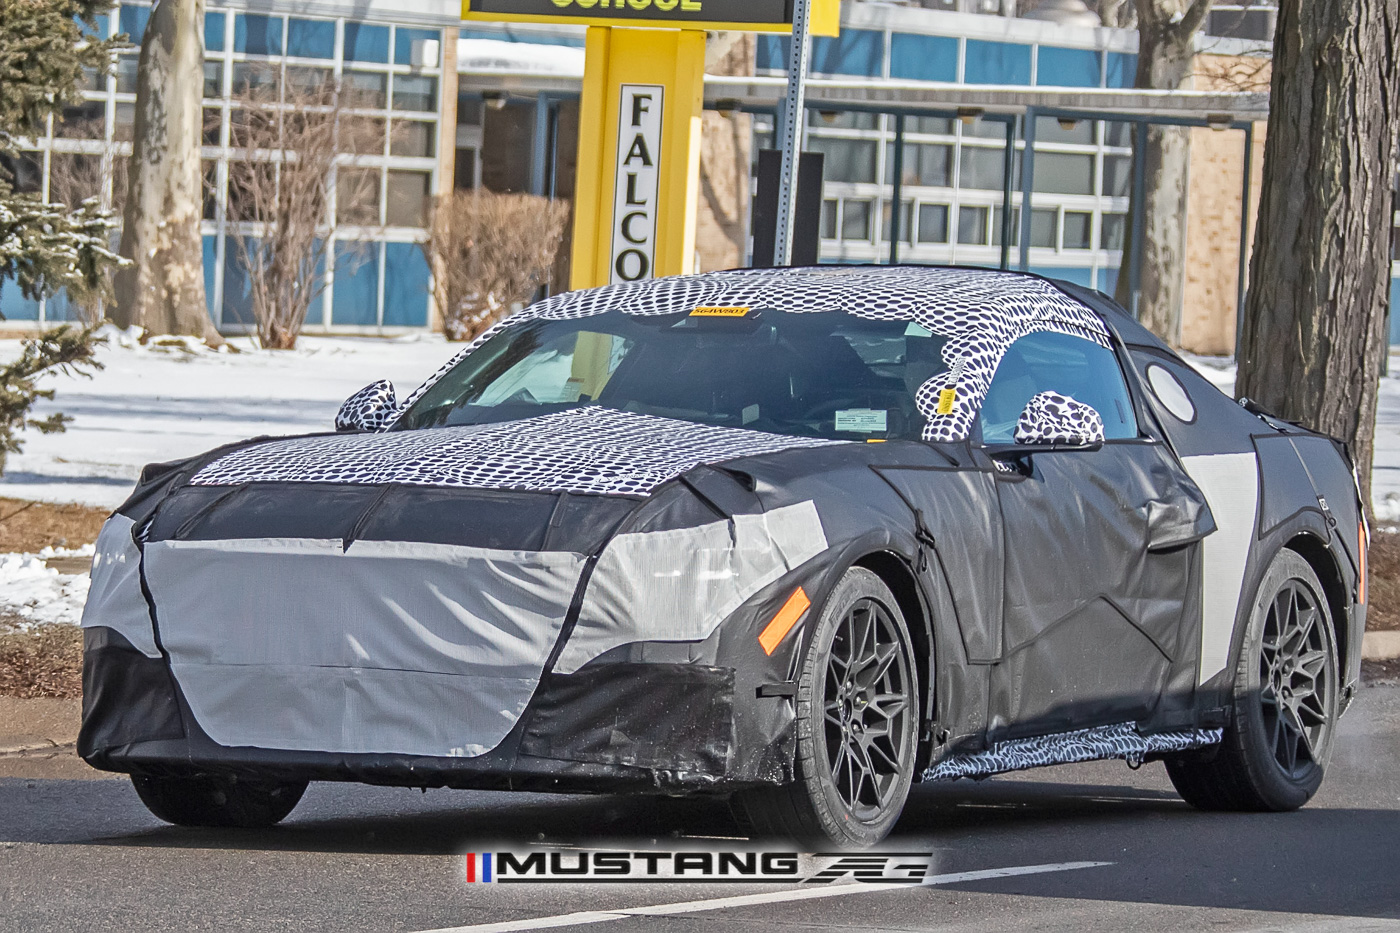 S650 Mustang Spied: New Mustang Prototype w/ Mach 1-Style Wheels, Upgraded Dual Caliper Rear Brakes 📸 s650-mustang-new-mach1-prototype-spied-2-